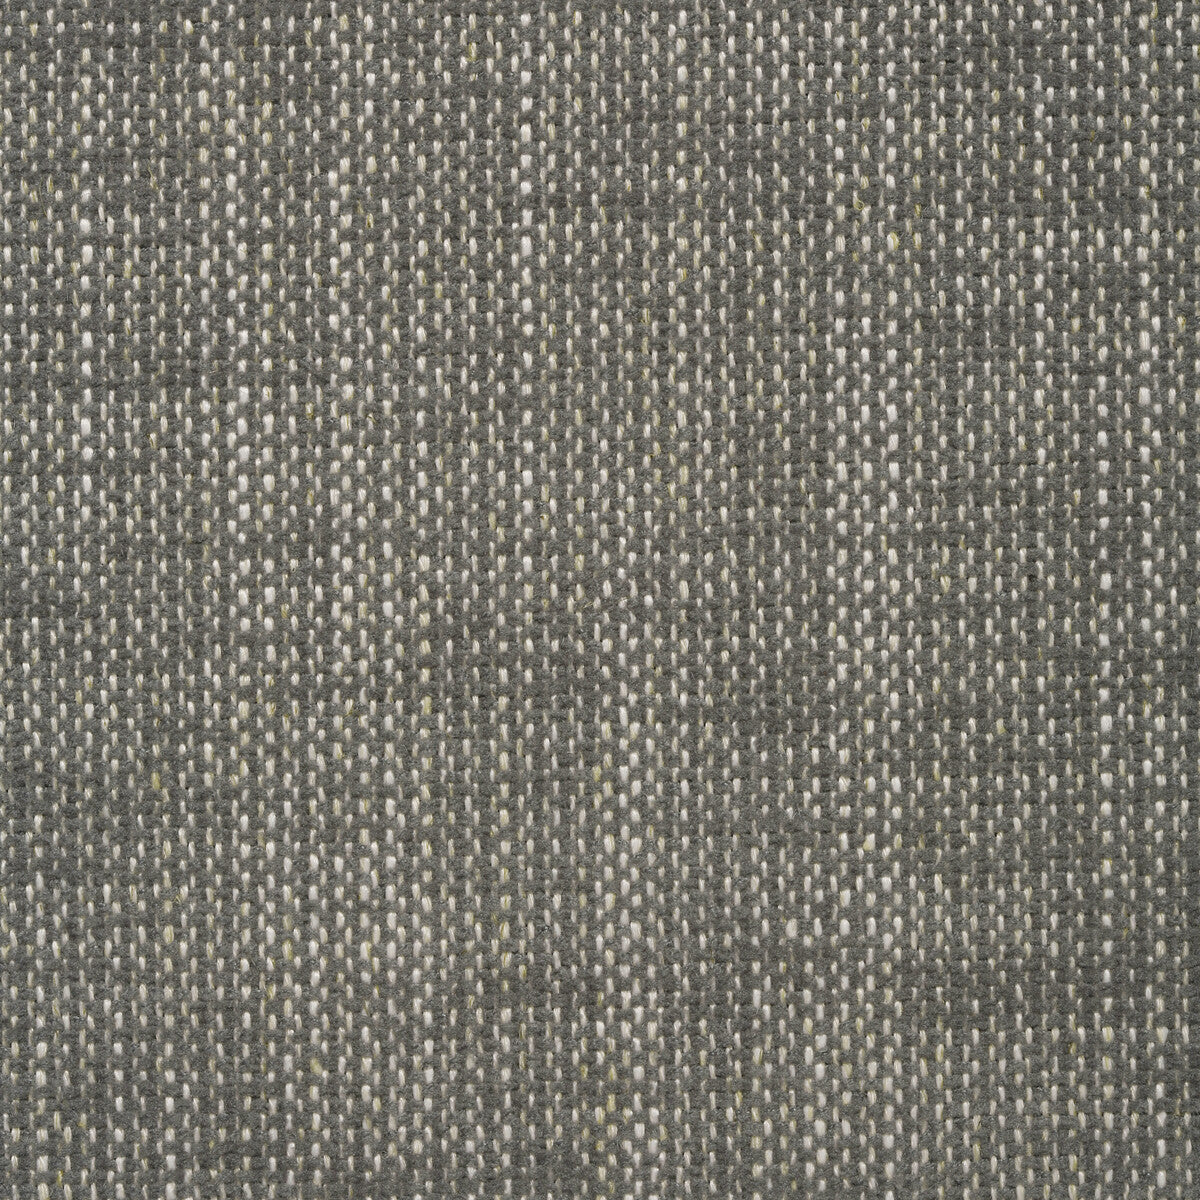 Kravet Smart fabric in 35111-21 color - pattern 35111.21.0 - by Kravet Smart in the Performance Crypton Home collection